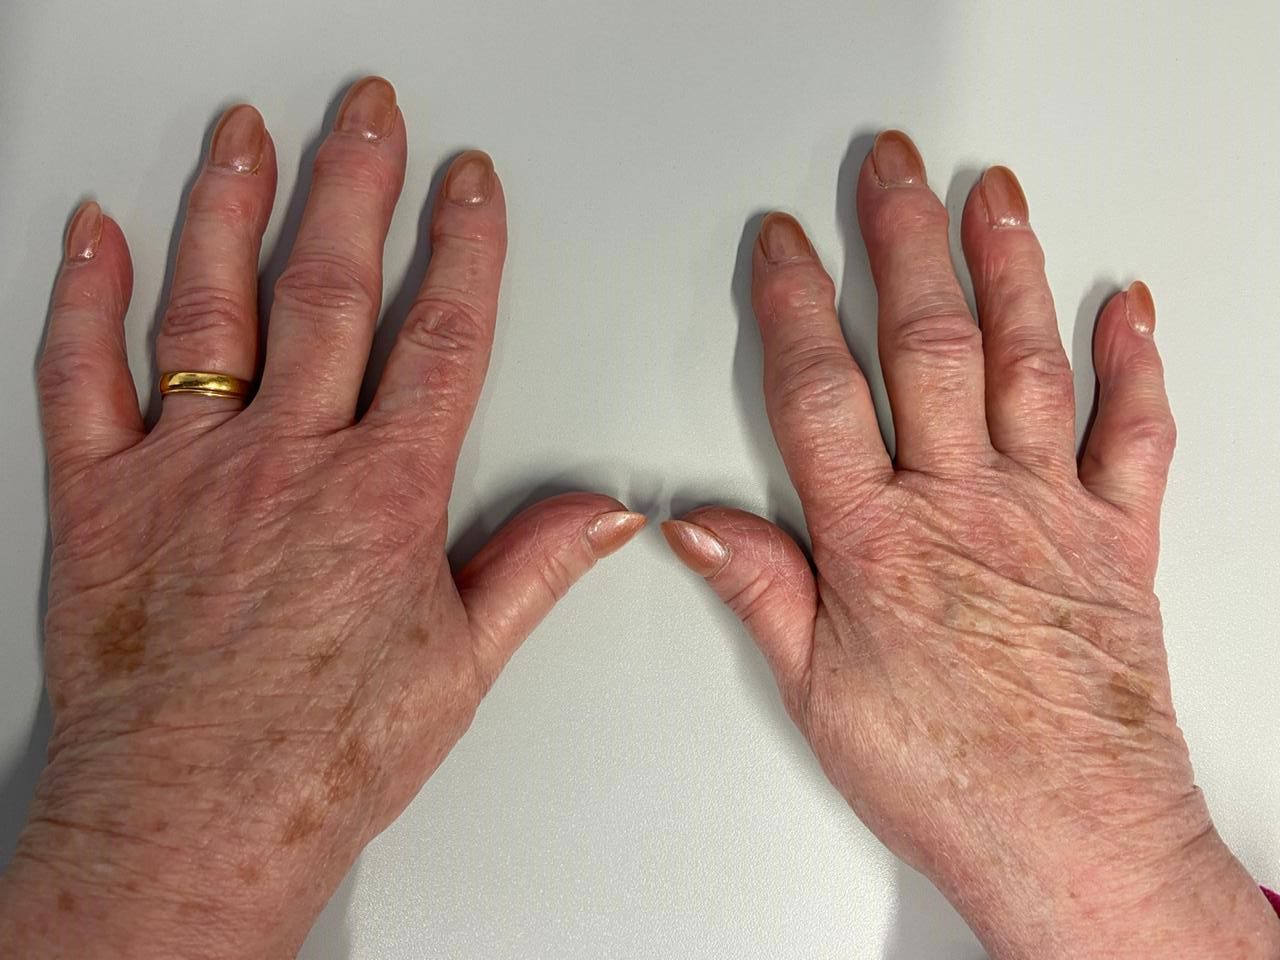 How Hand Osteoarthritis Is Associated With Hand Pain And Function